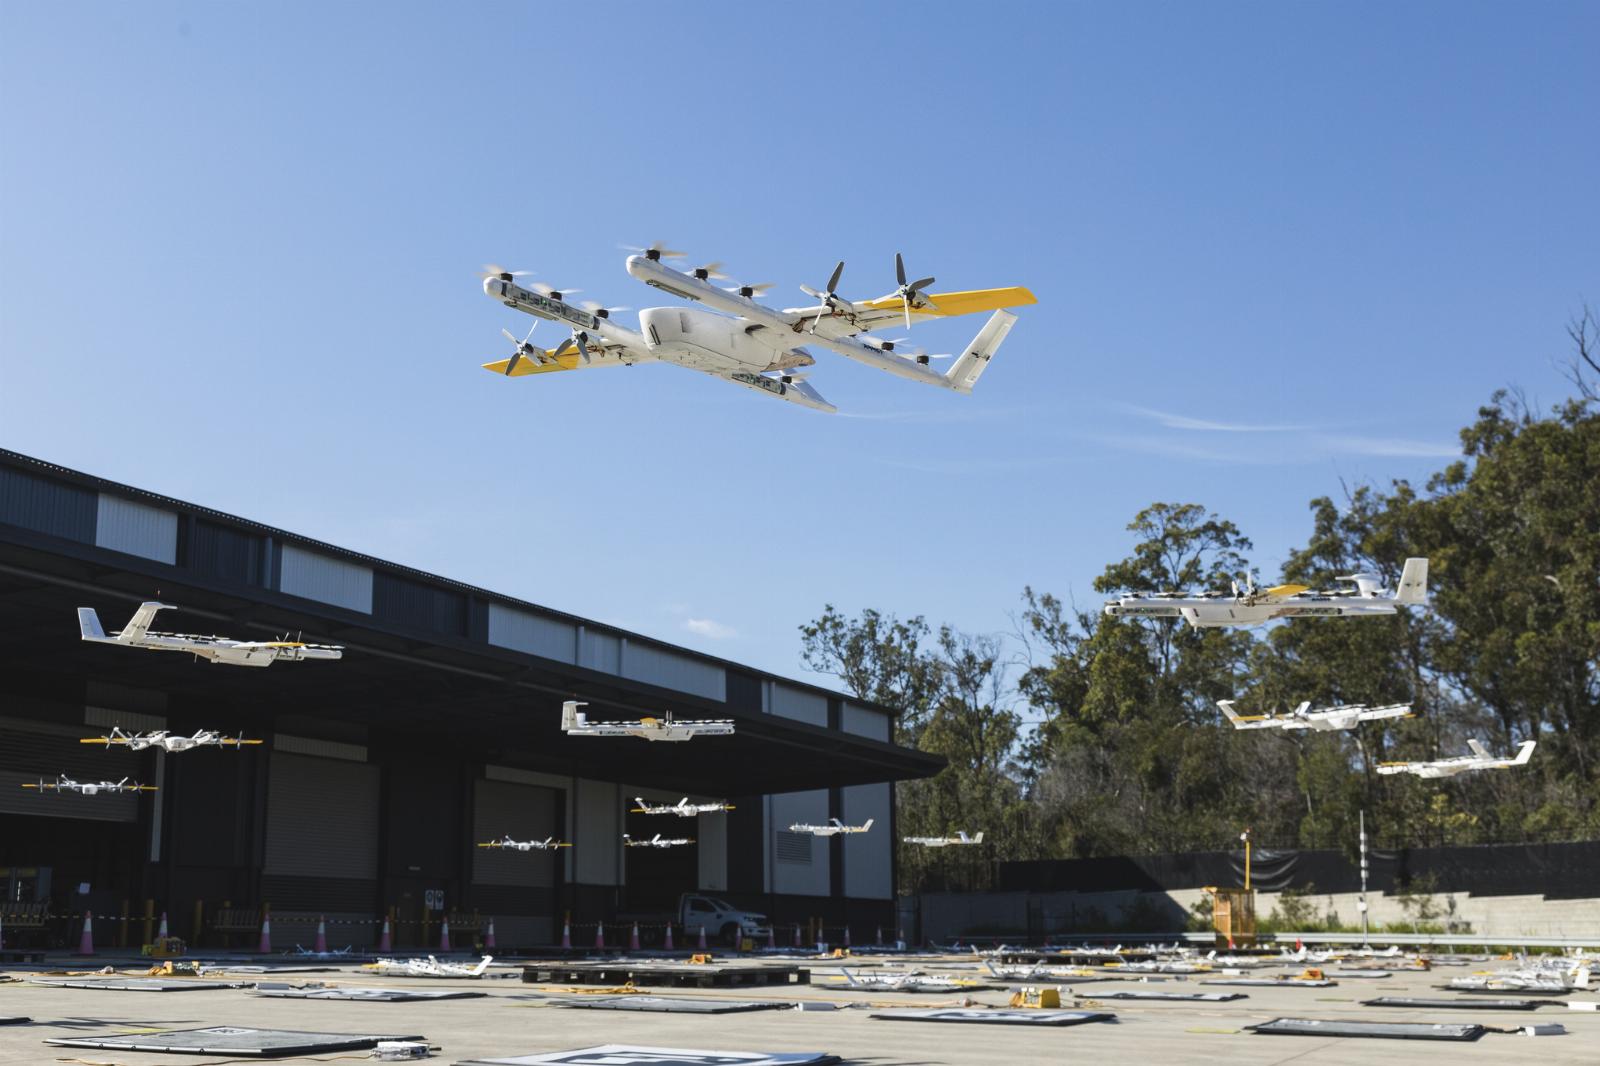 Walmart is adding Wing drone deliveries to limited Superstores this year